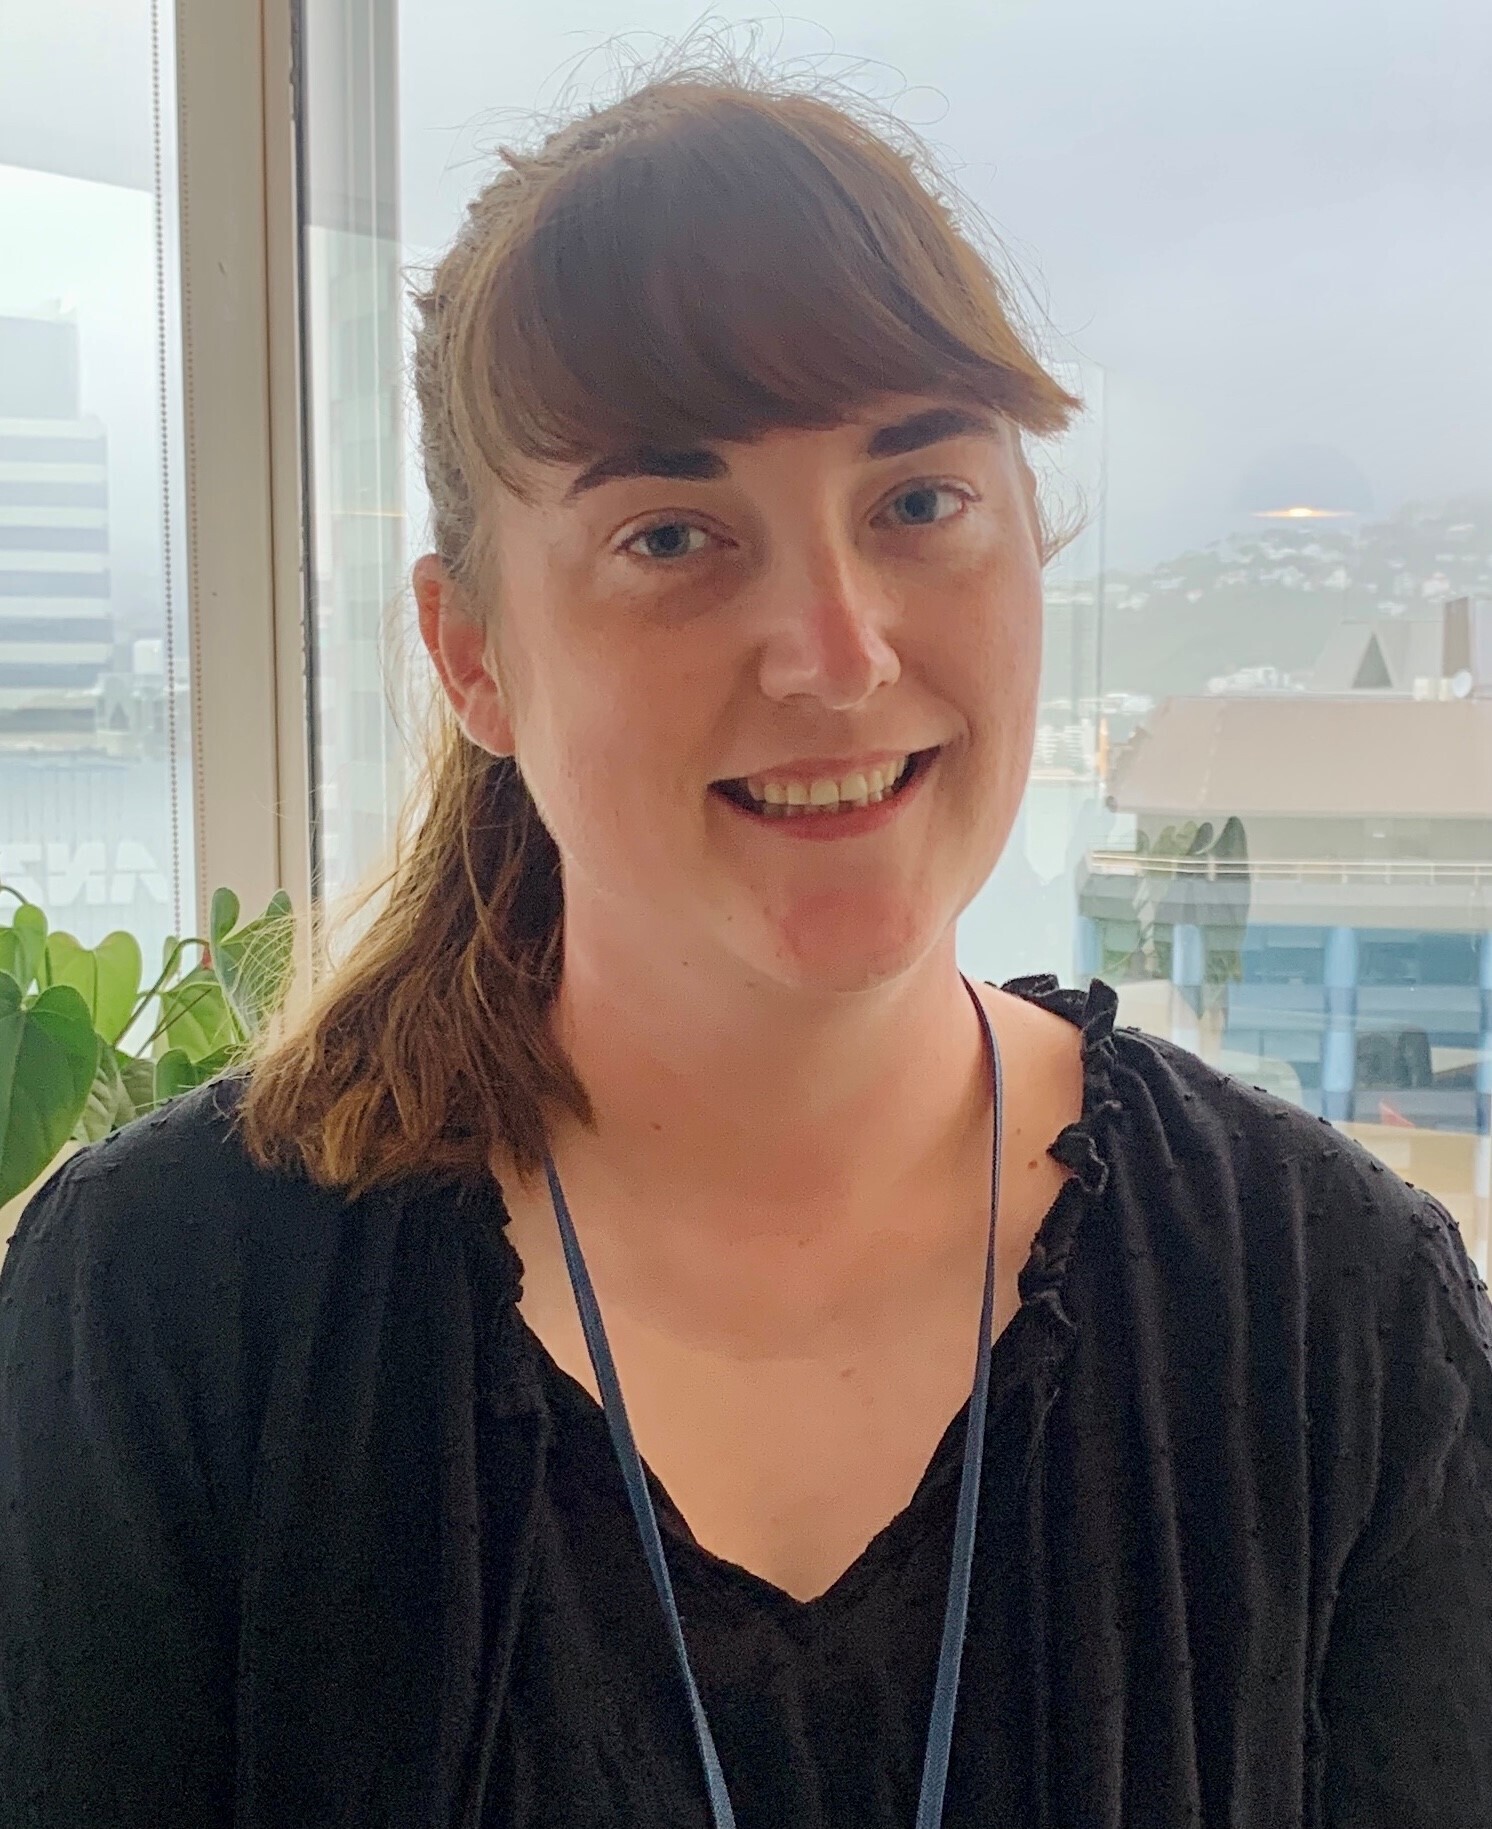 Headshot of Jadene Windley, Assistant Manager at Grant Thornton NZ who answers these interview questions about Grant Thornton's adoption of approval automation with ApprovalMax 